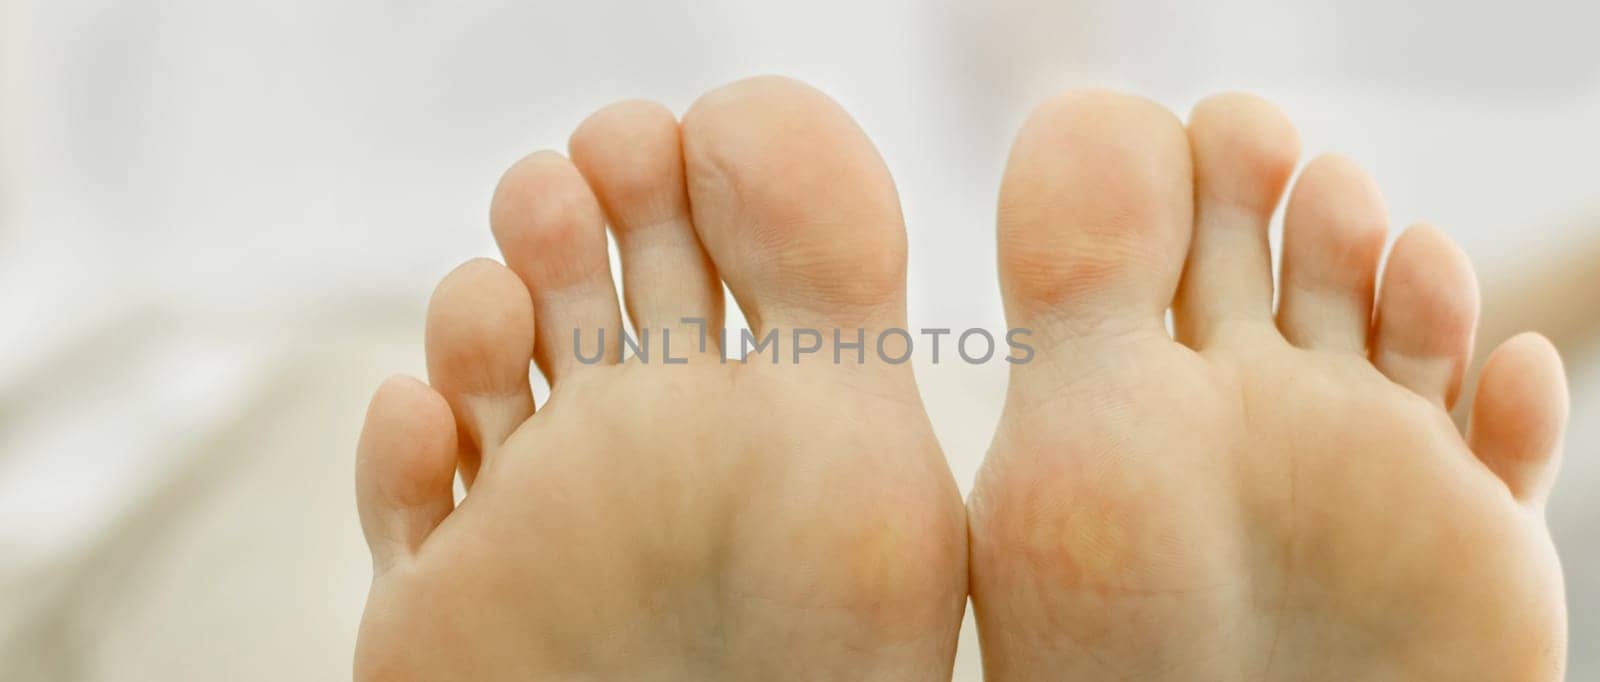 Two feet of a woman pressed against each other. Toes close-up, foot partially visible. by Sd28DimoN_1976